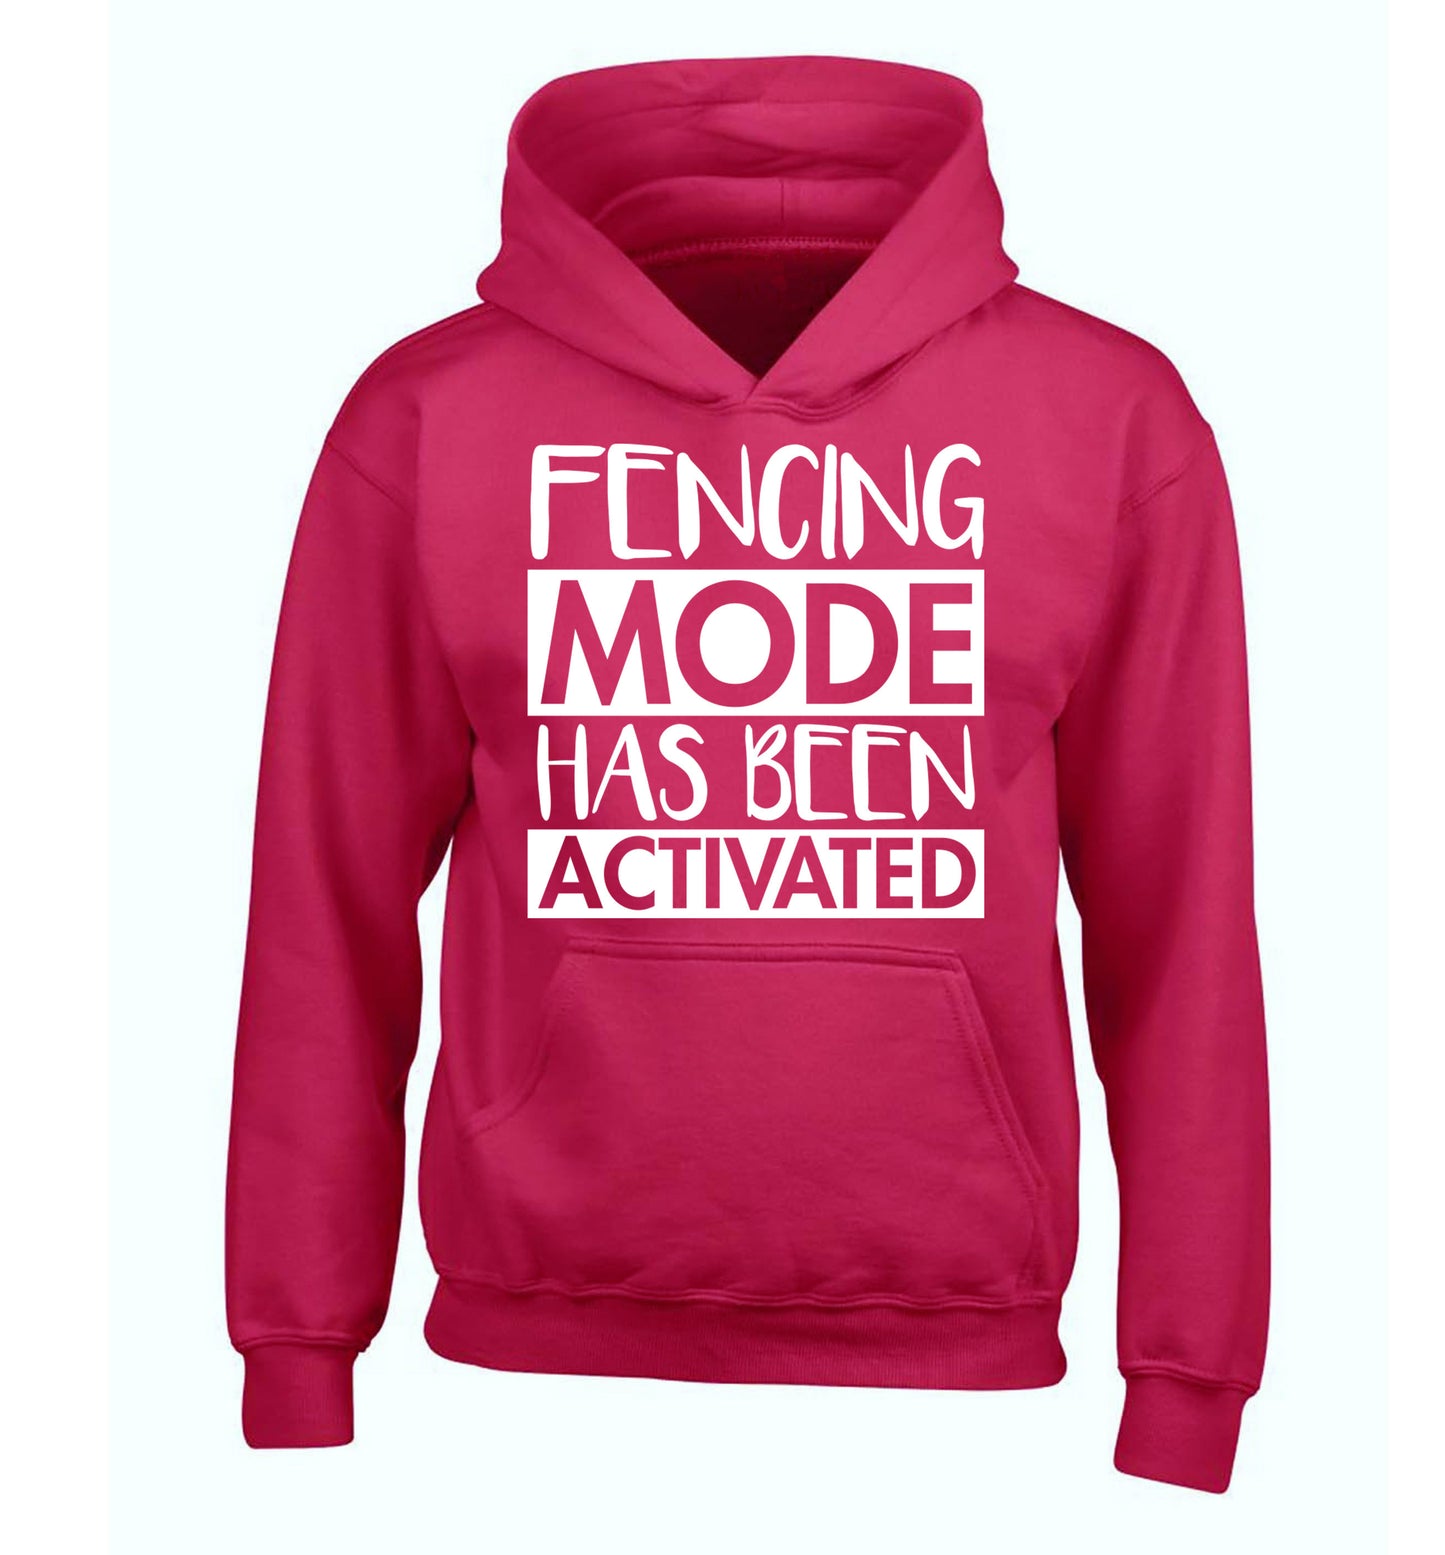 Fencing mode activated children's pink hoodie 12-14 Years